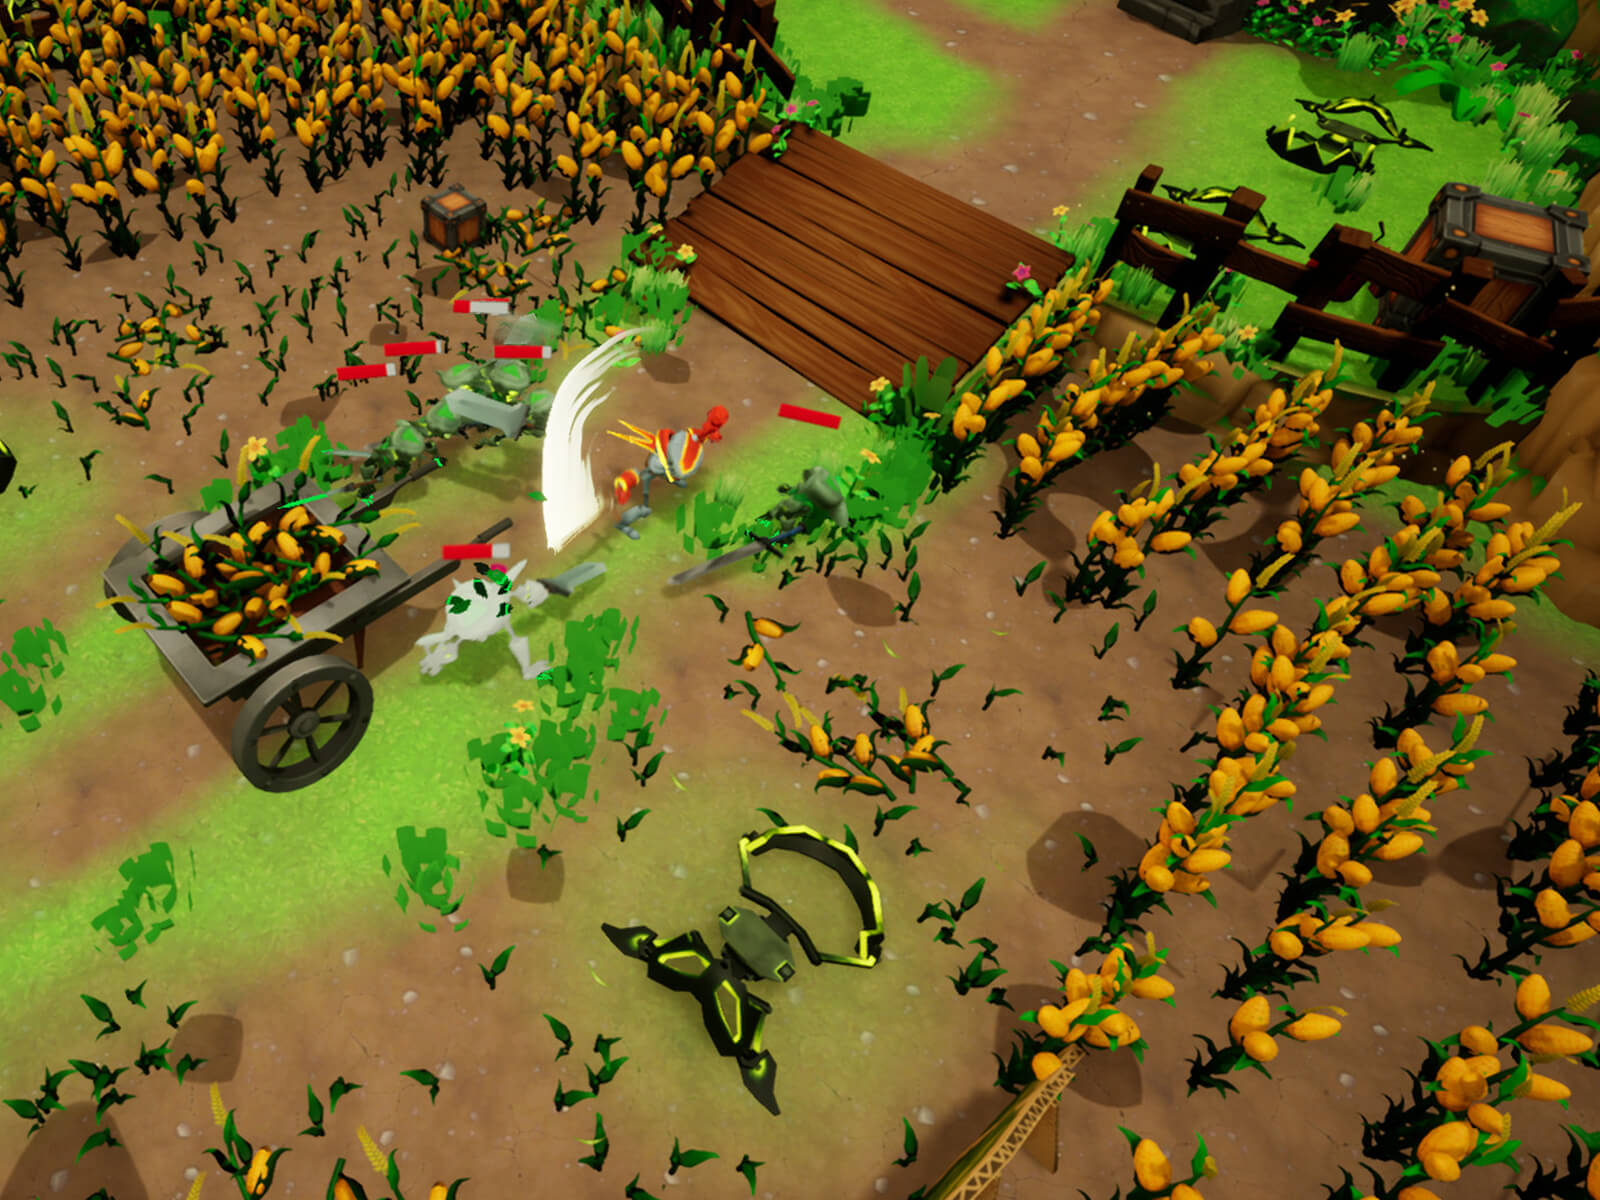 Excalibots screenshot: Robot knight swings sword at cluster of enemy goblins in a field of flowers